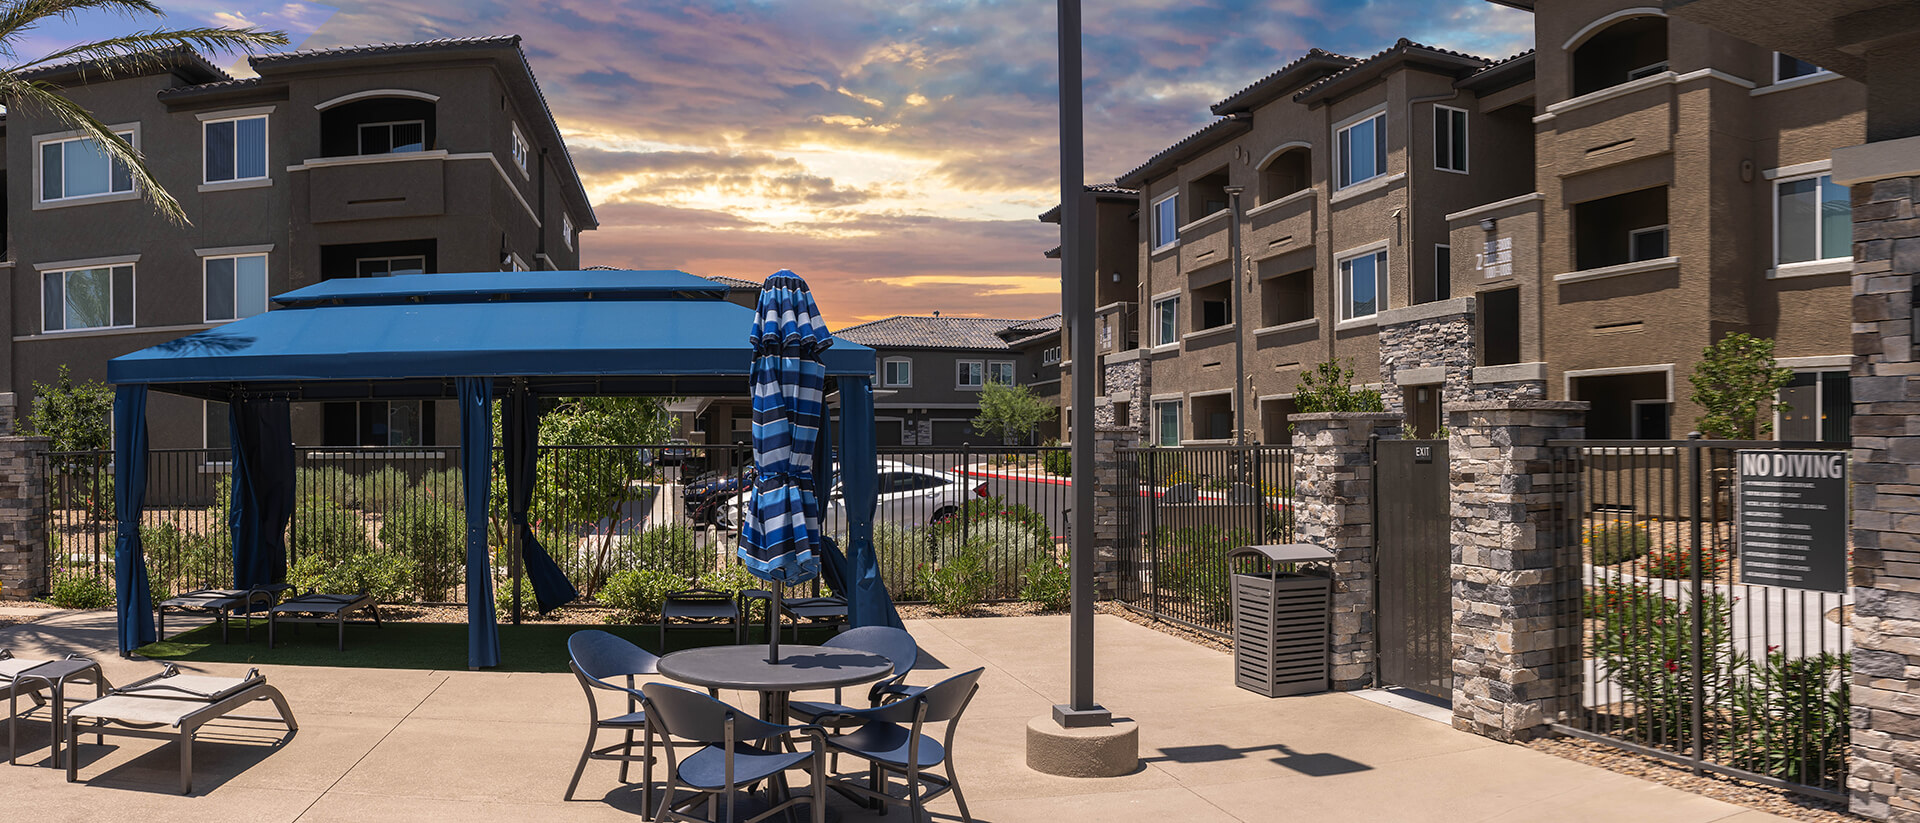 Poolside Awnings at Level 25 Apartments in Las Vegas, Nevada - Cabanas Fabricated by Metro Awnings of Southern, Nevada